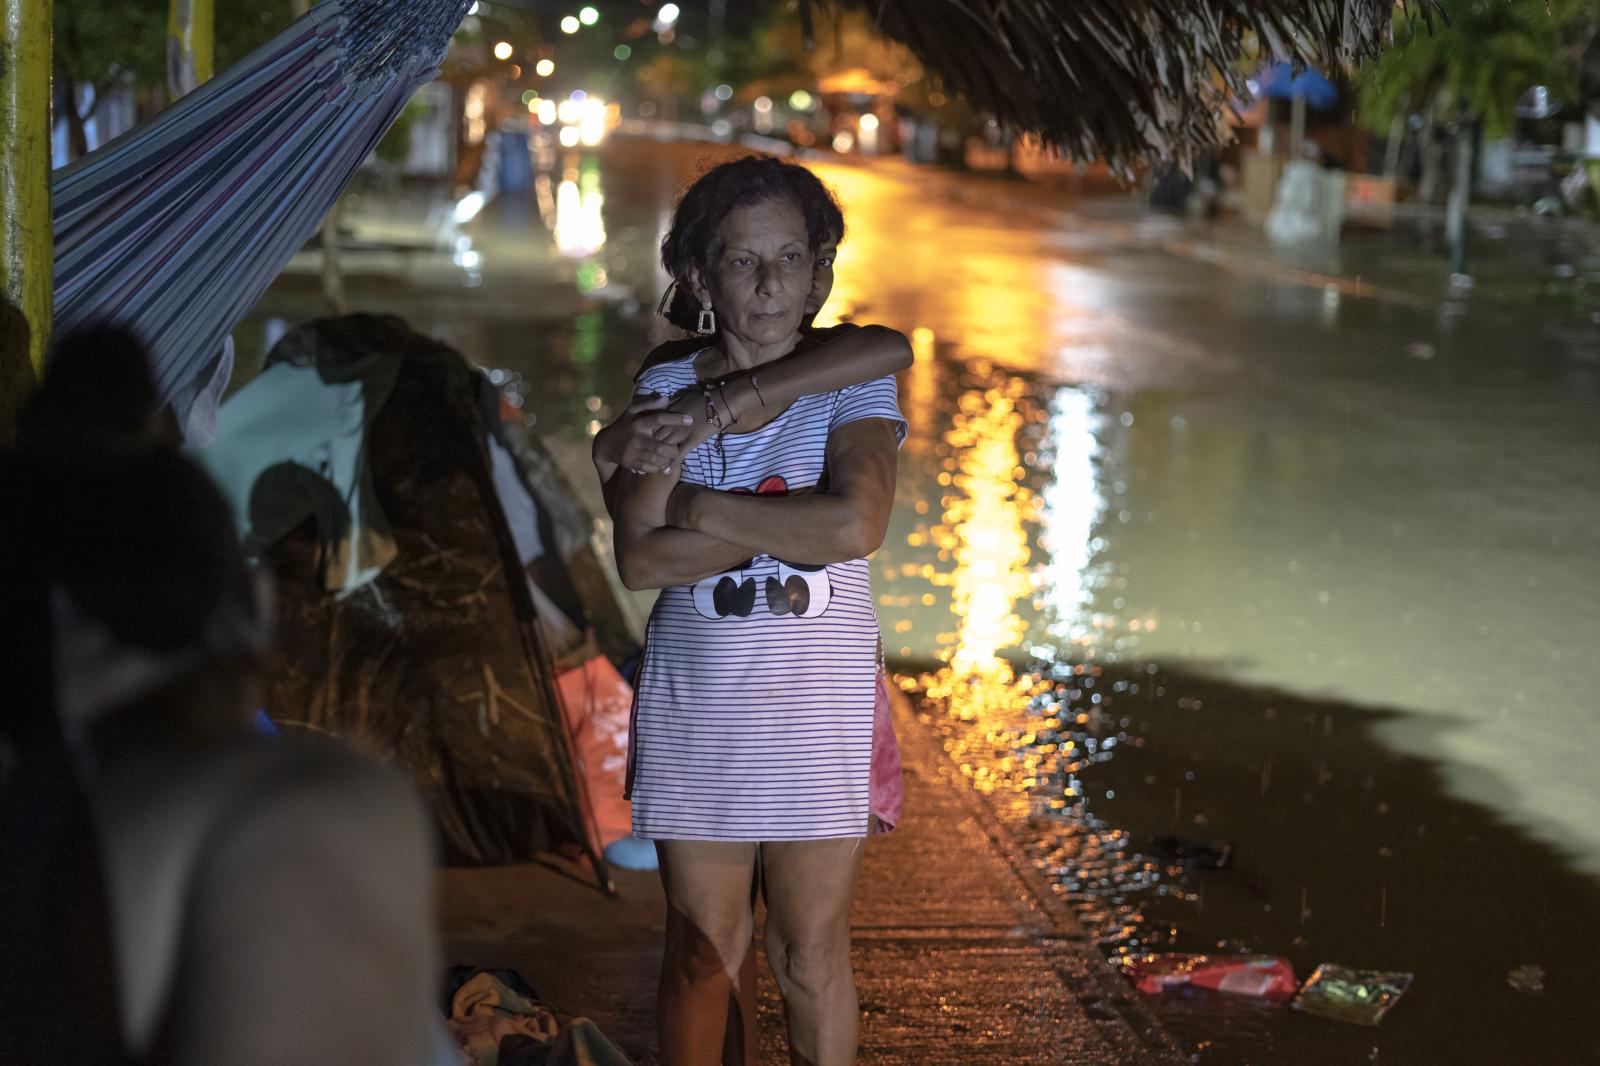 THOUSANDS STRANDED IN COASTAL COLOMBIA AS POLITICAL STRIFE CAUSES MIGRATION SURGE